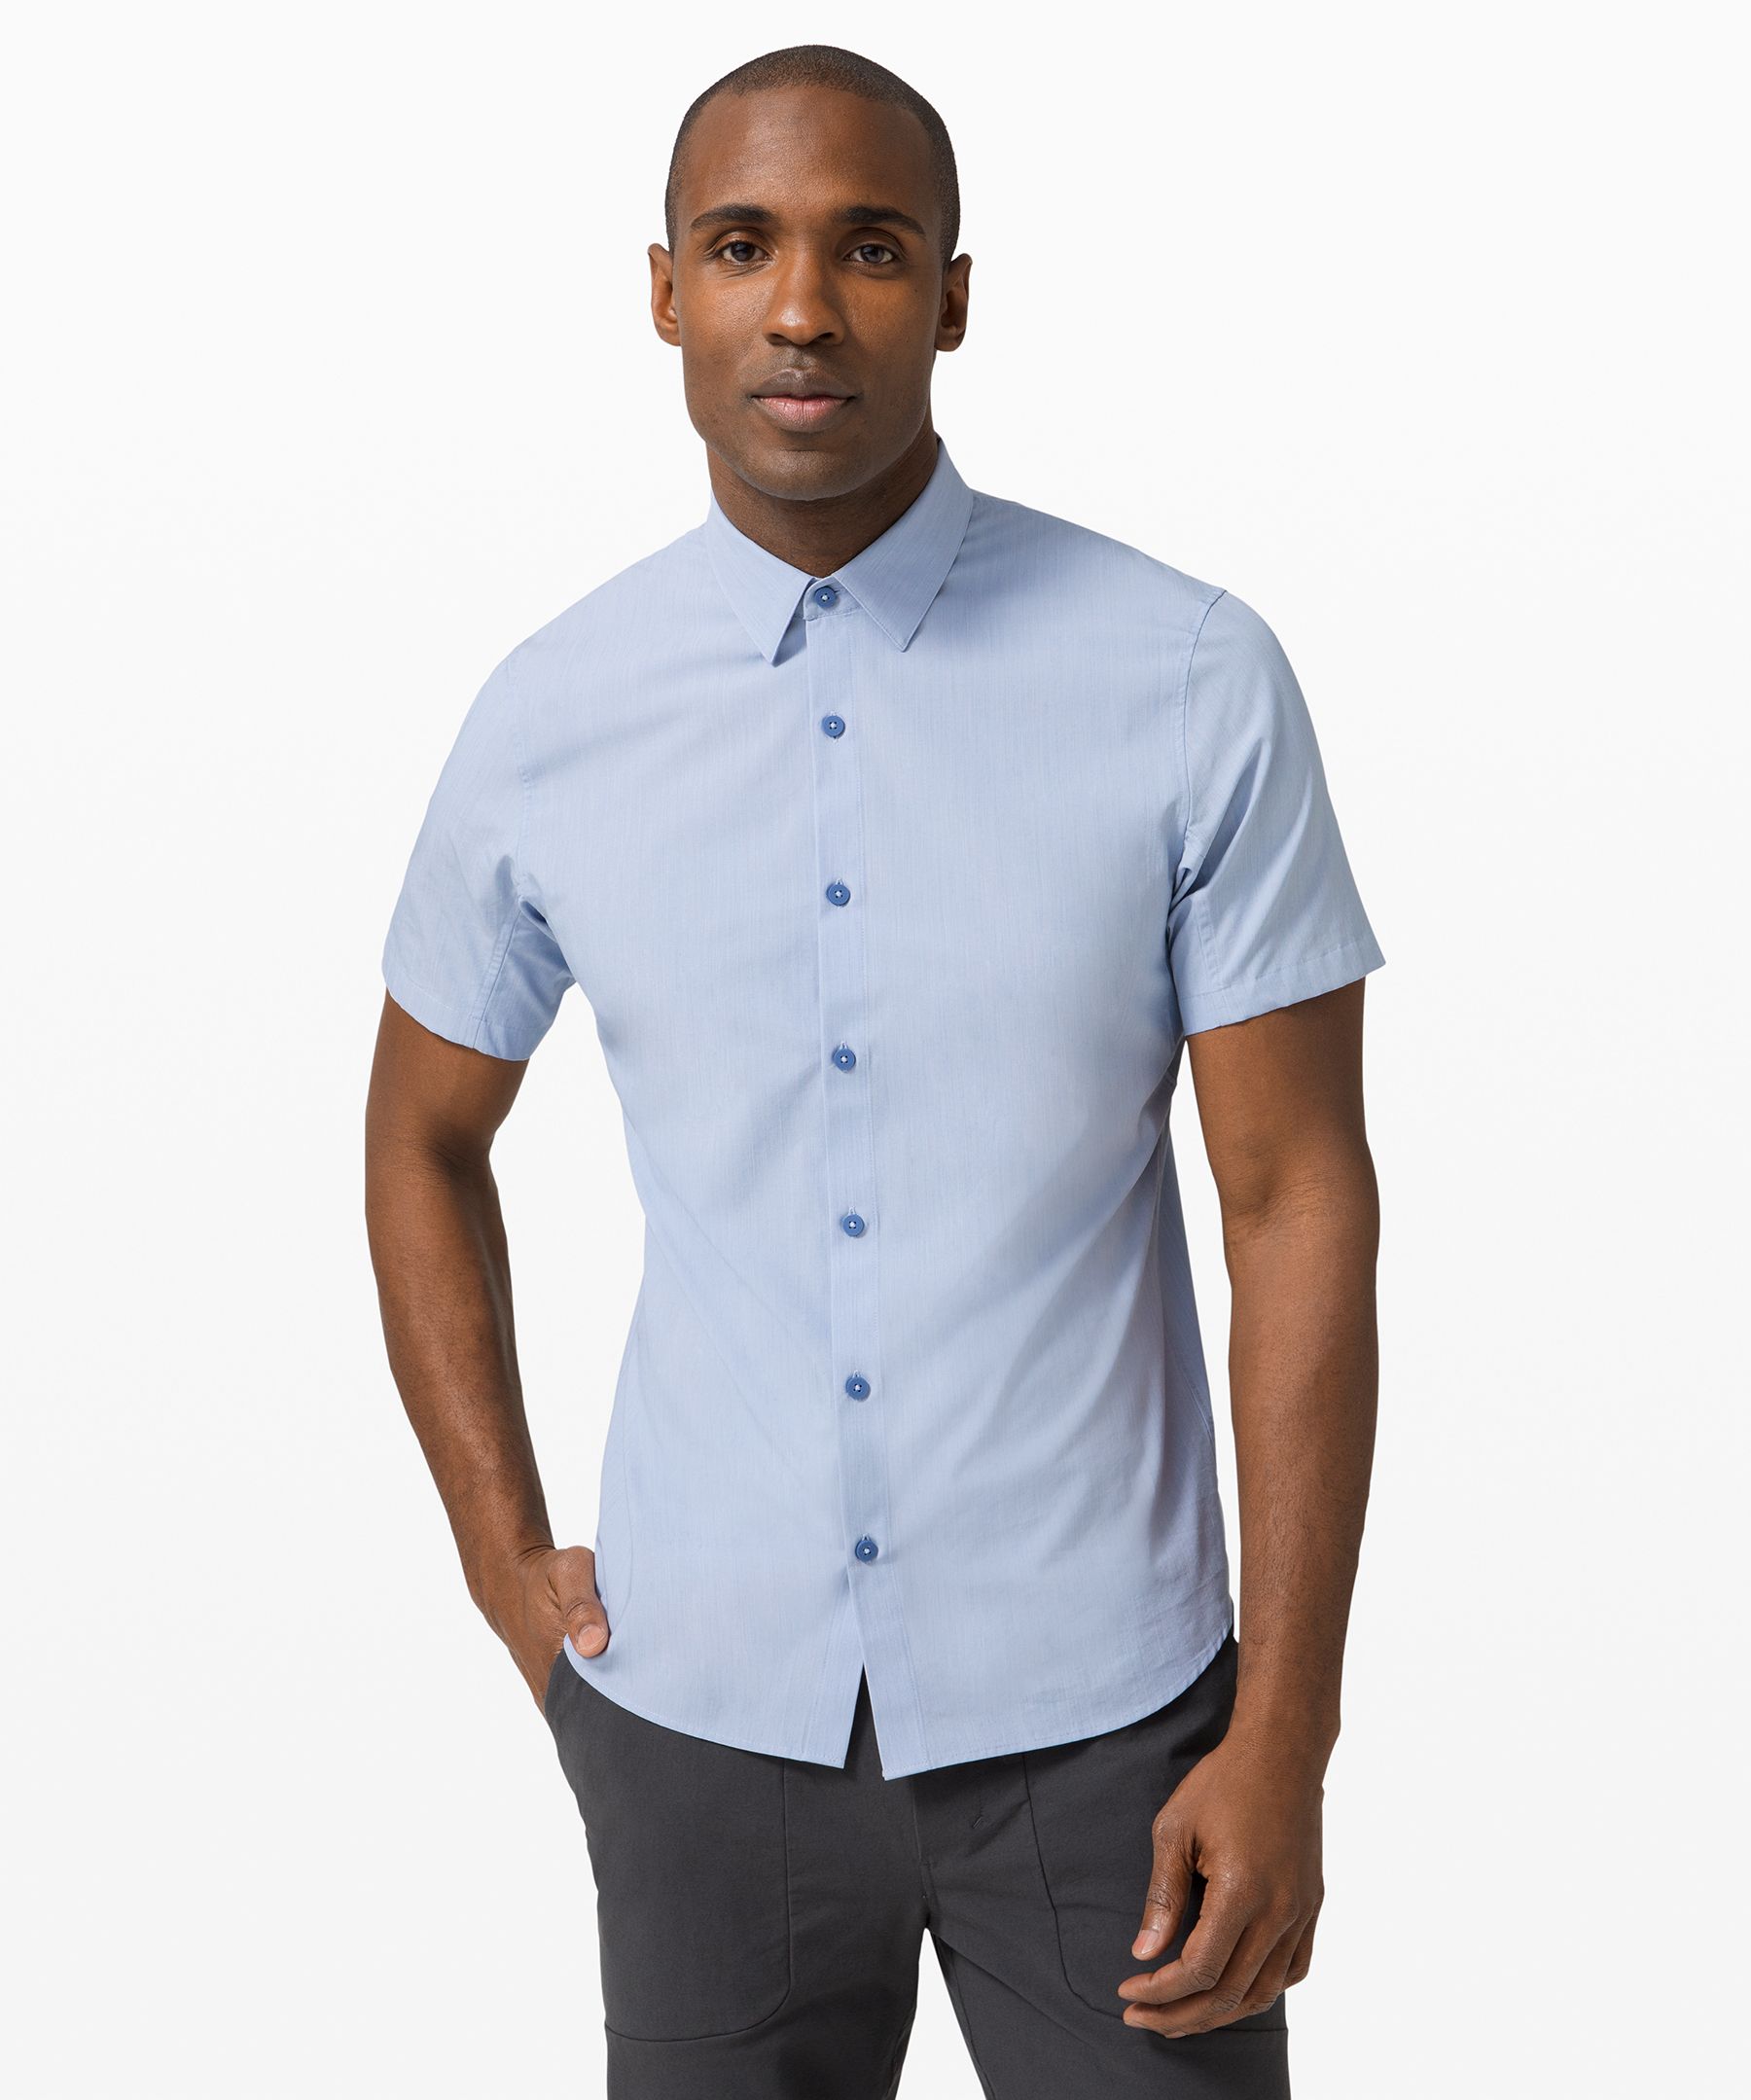 lululemon down to the wire shirt review